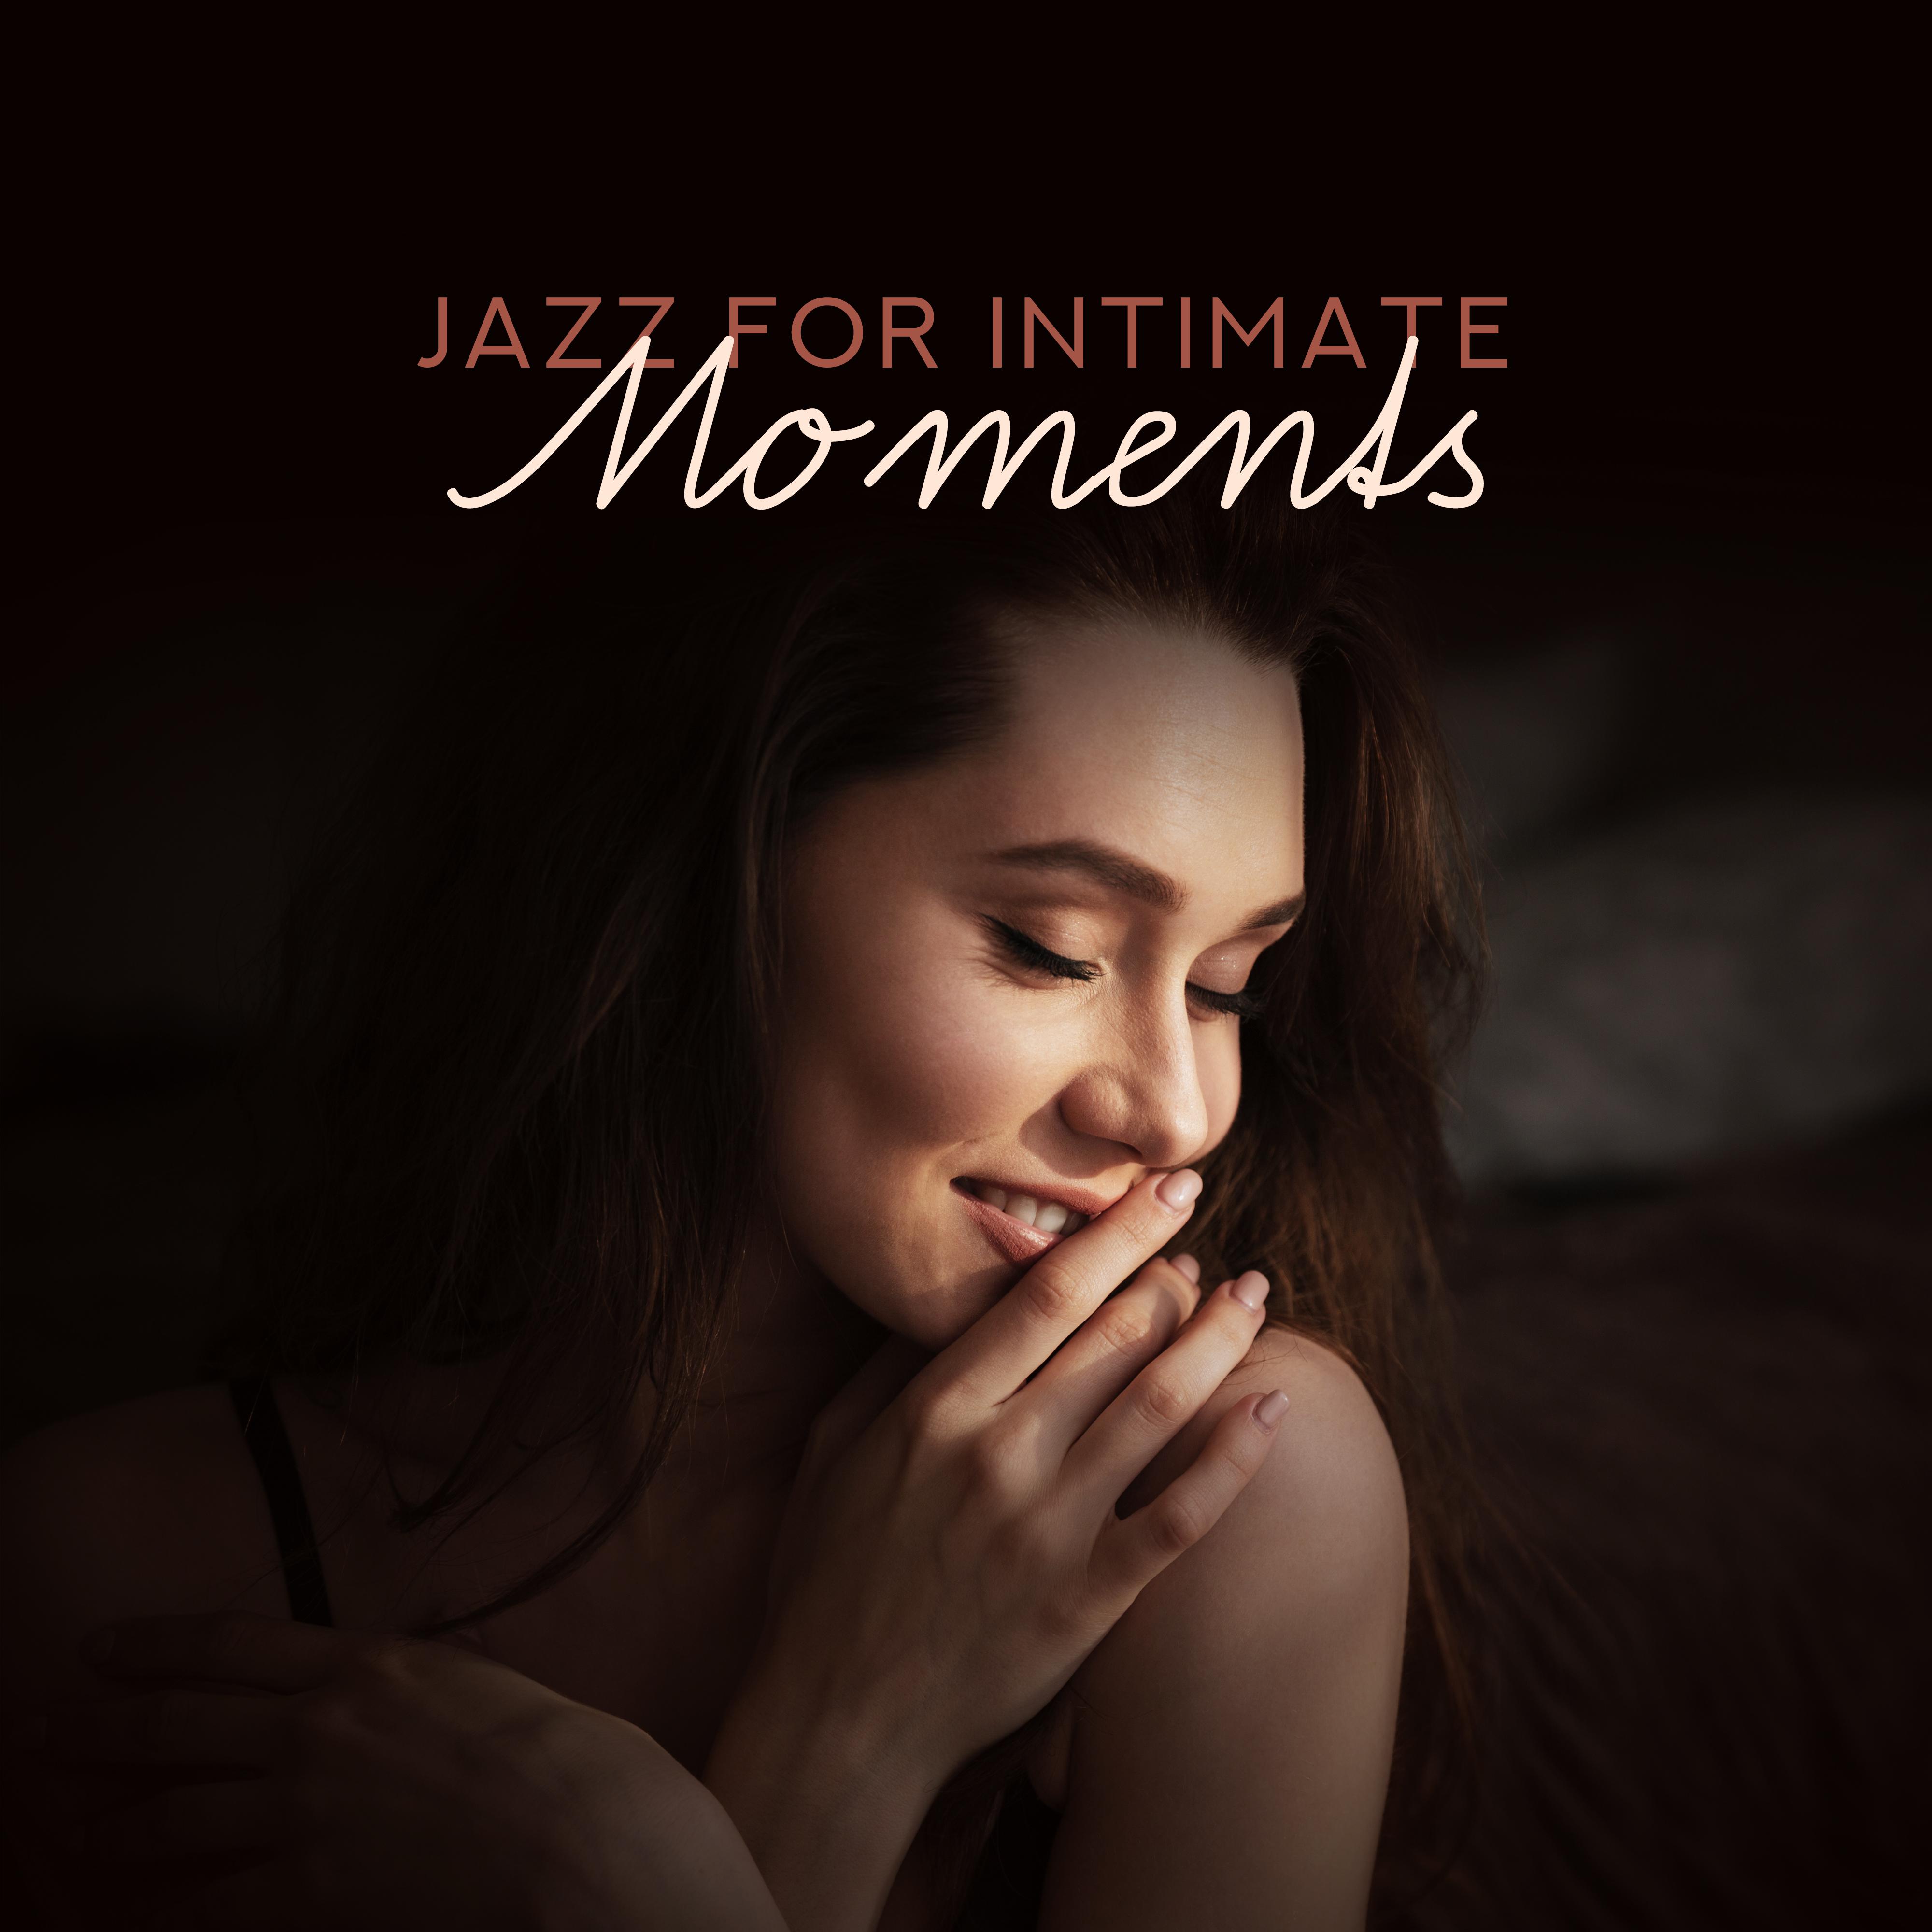 Jazz for Intimate Moments – Romantic Jazz Music, **** Relaxation, Making Love, Jazz Lounge, Deep Relaxation, Pure Jazz 2019